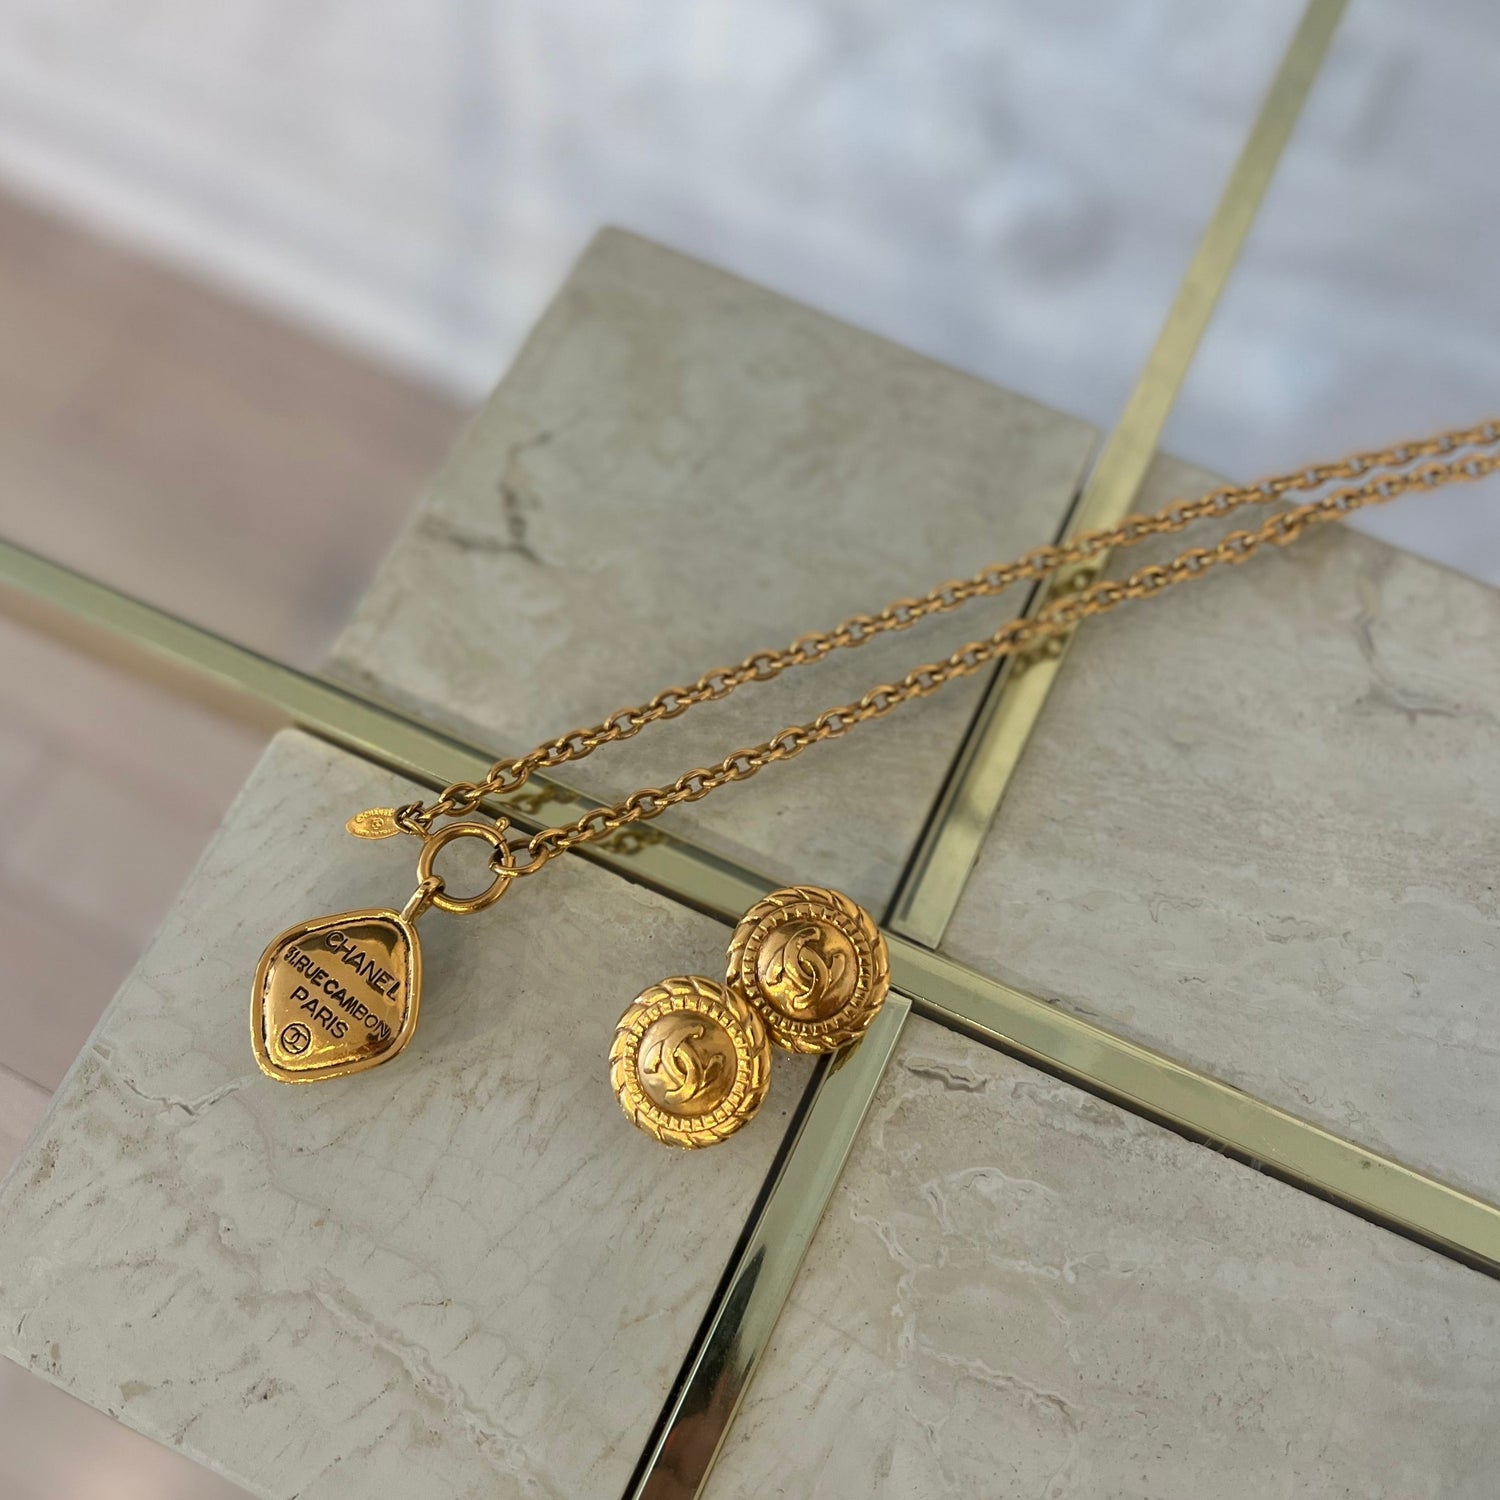 Chanel Vintage Rue Cambon Pendant Necklace – The Vintage New Yorker